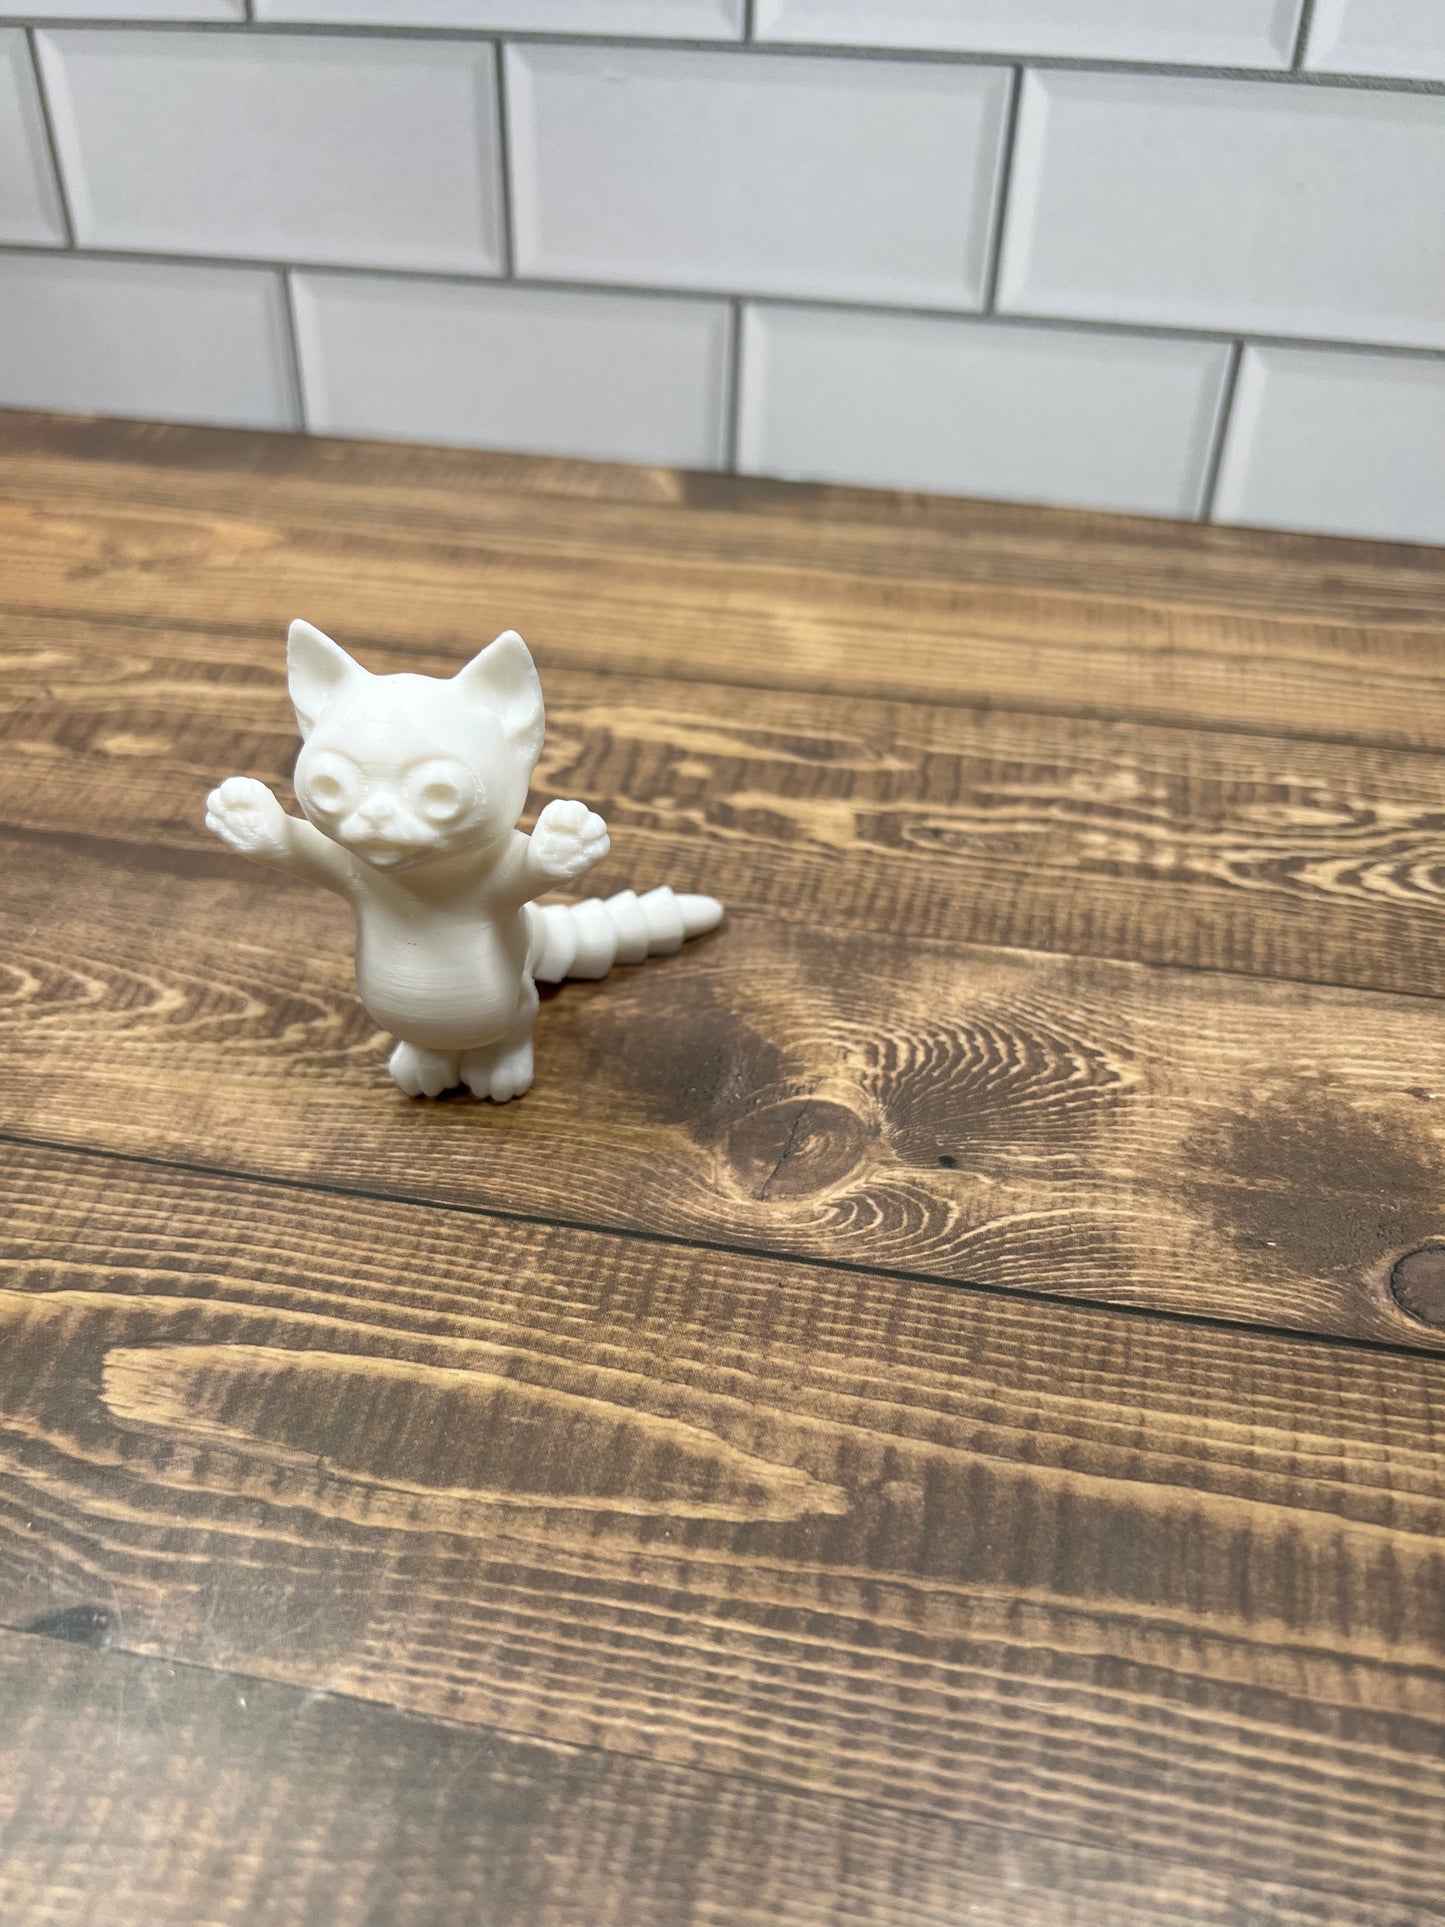 3D Printed Articulated Boo Kitty Decoration